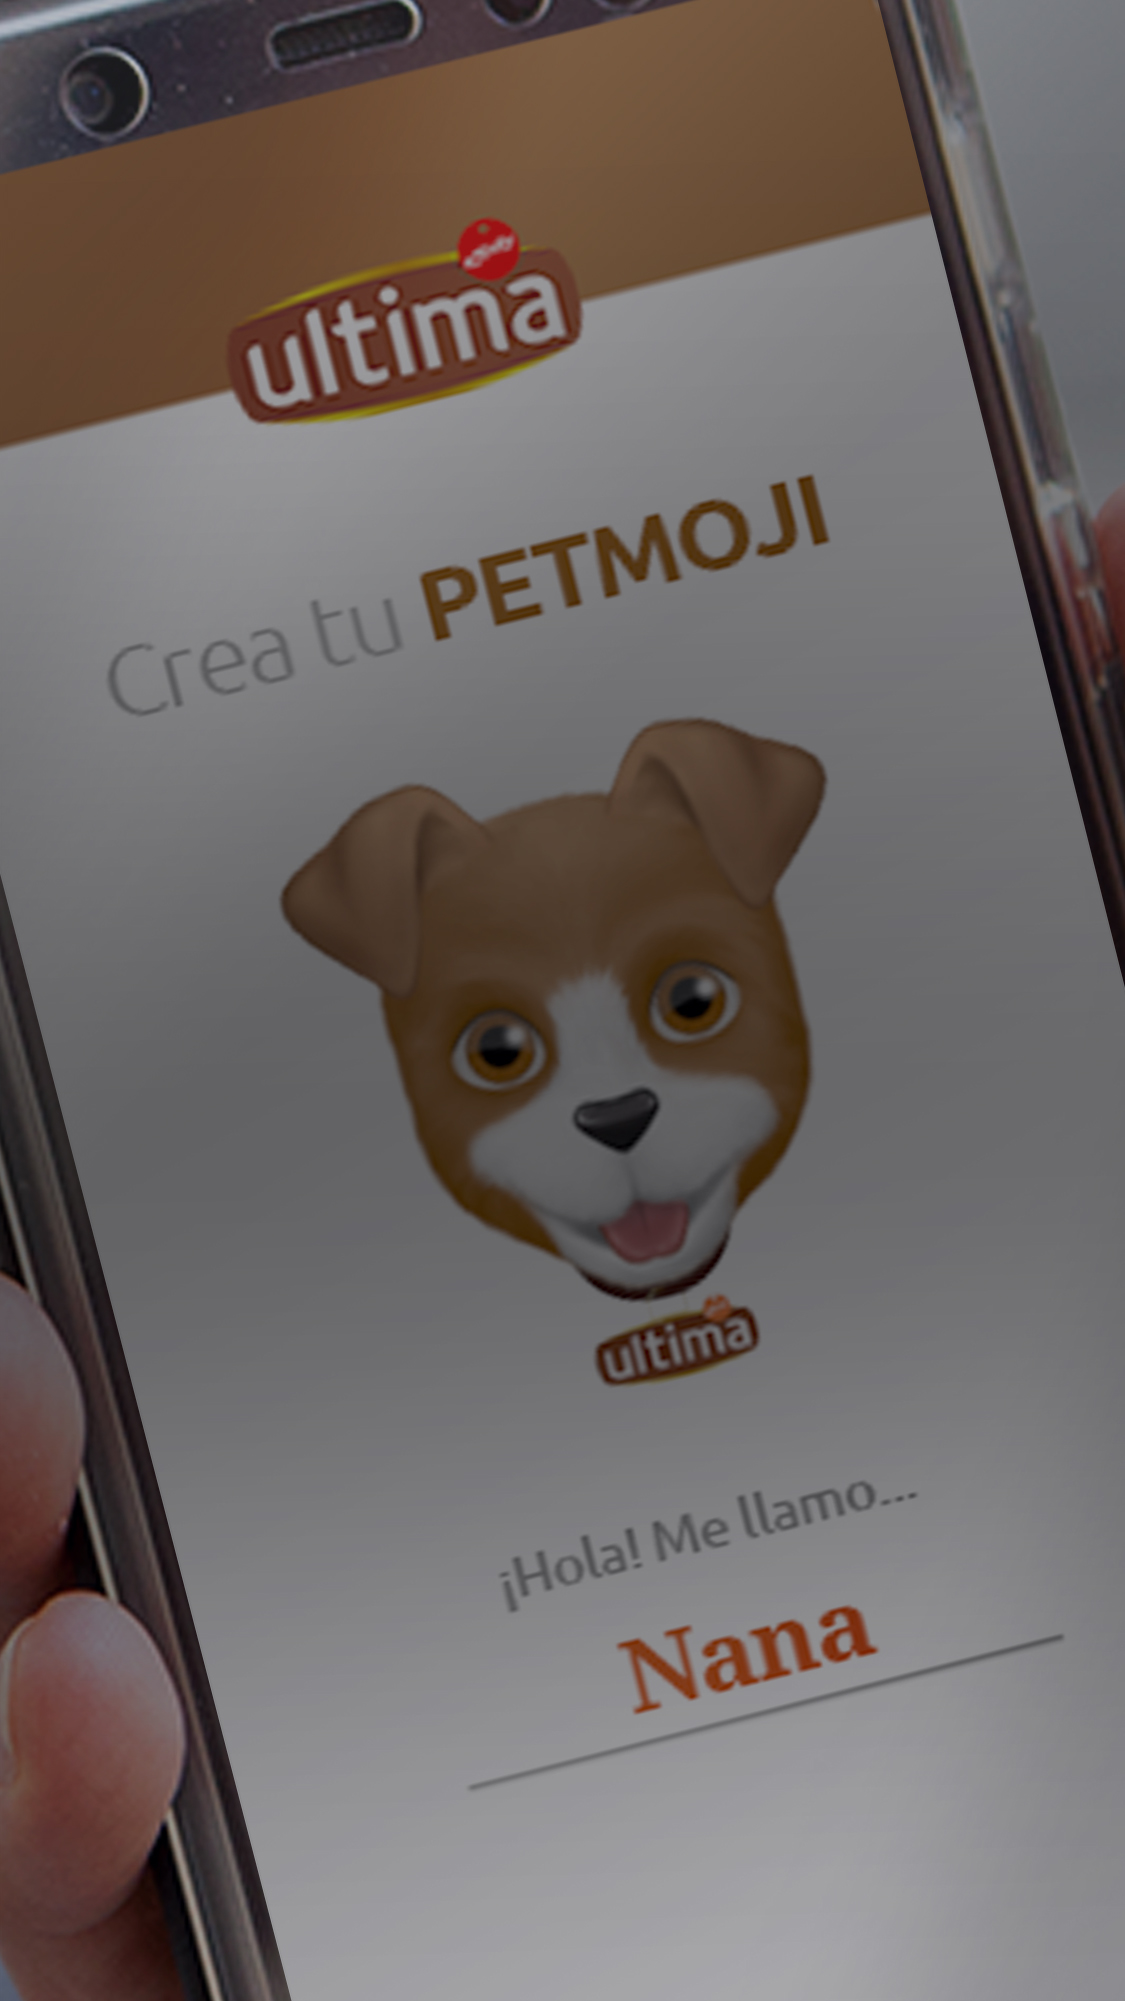 Welcome to your PETmoji Creator! Choose between dog or cat, personalise its details and share it on WhatsApp.